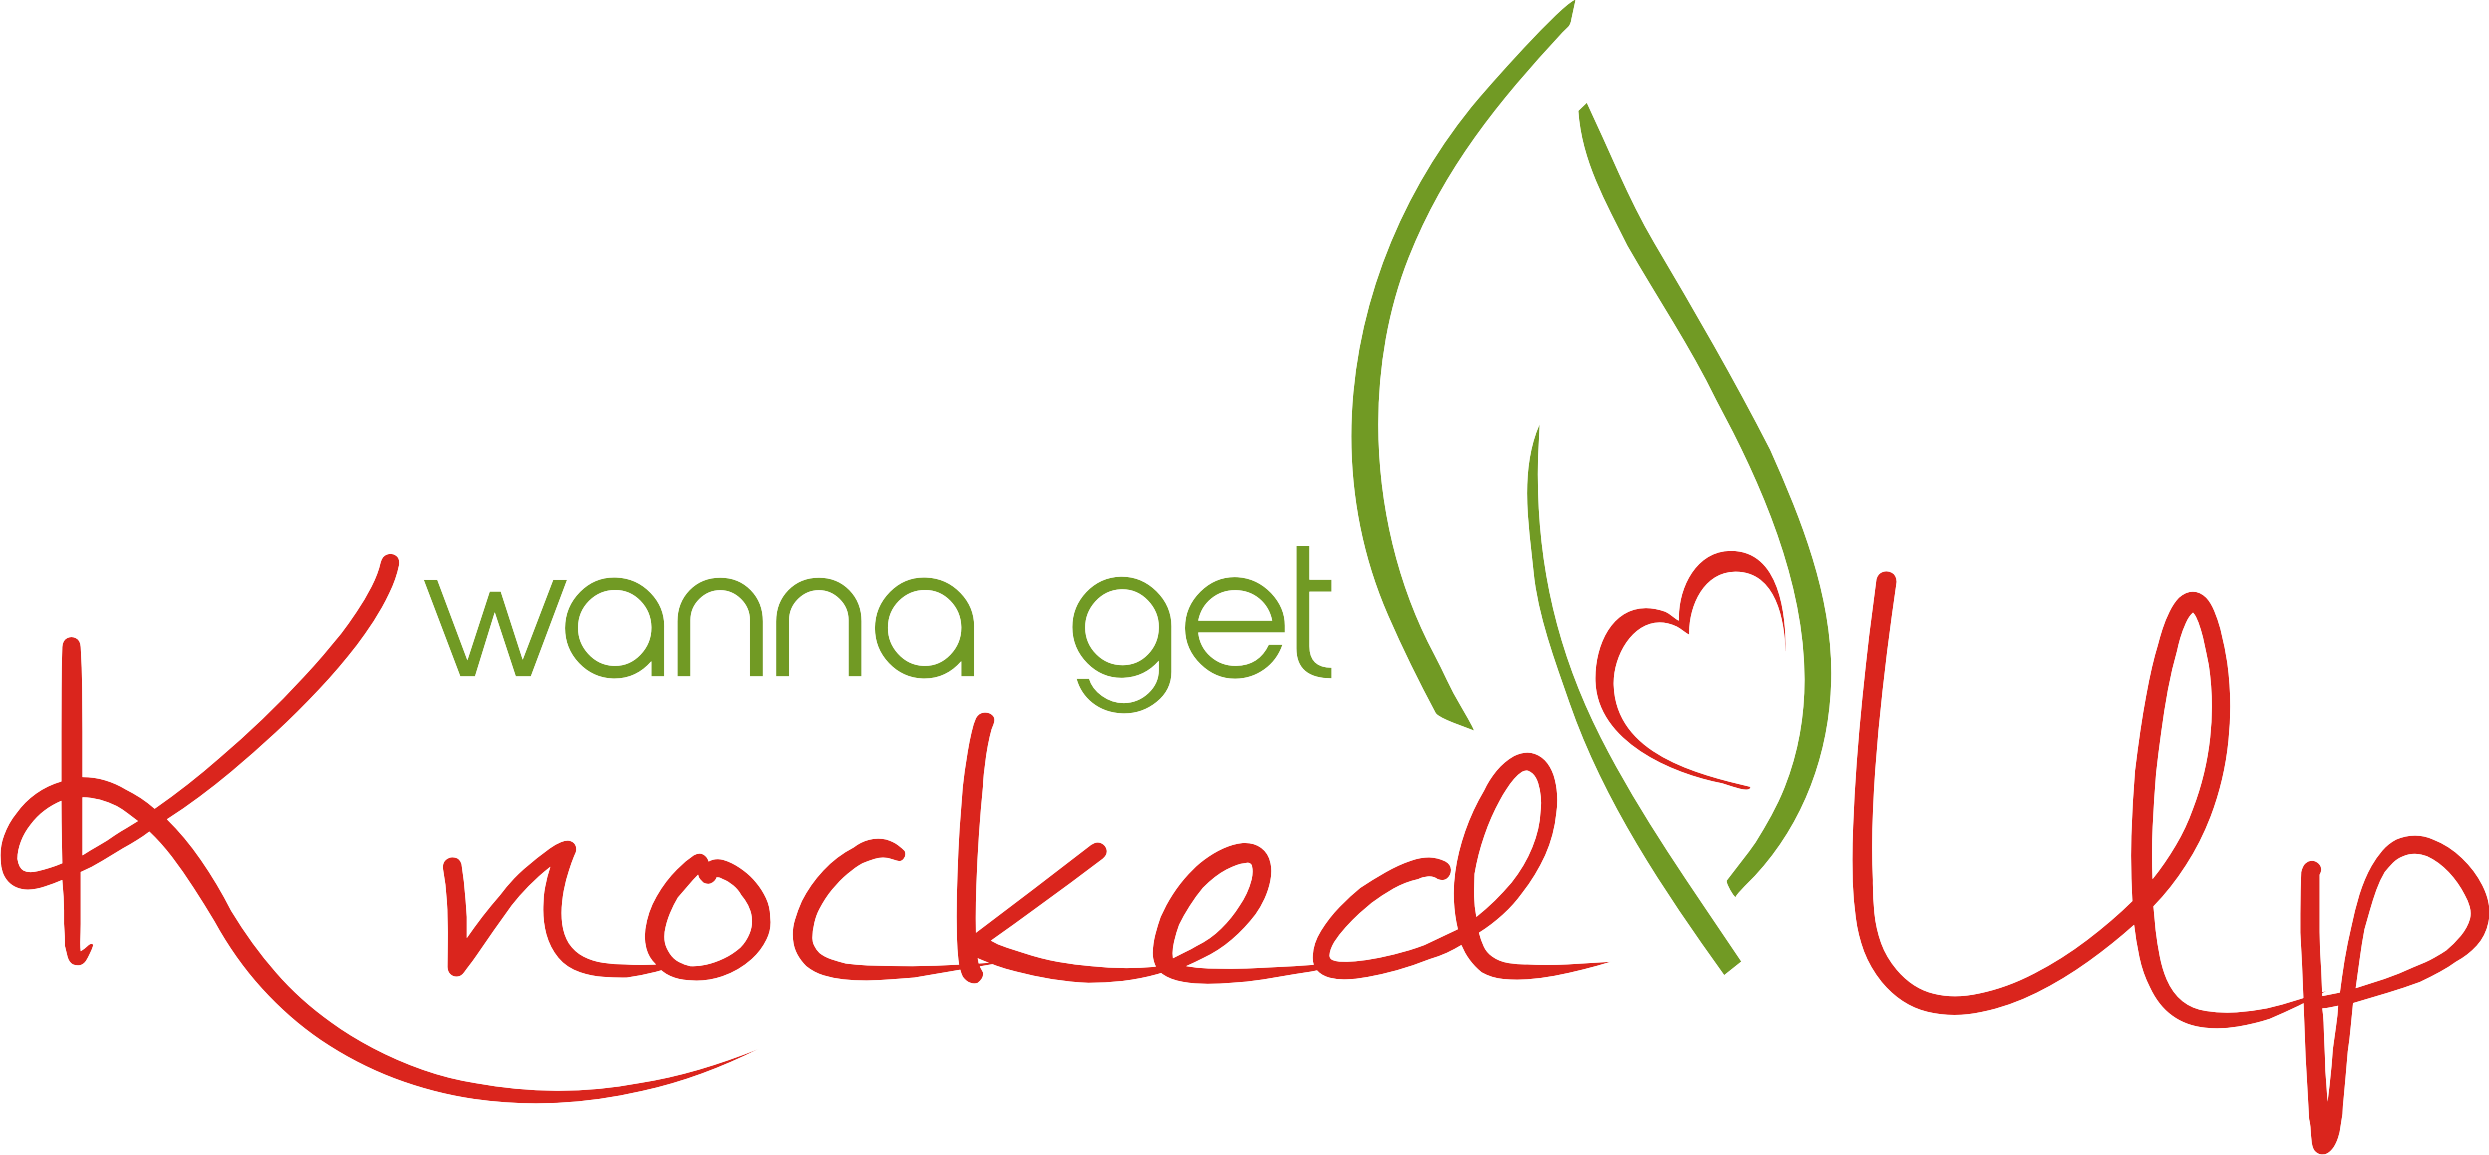 Special guest Cassandra Bach is a fertility coach from “Wanna Get Knocked Up” which knocks out women's fears to get and keep them knocked up to make their baby dreams come true.